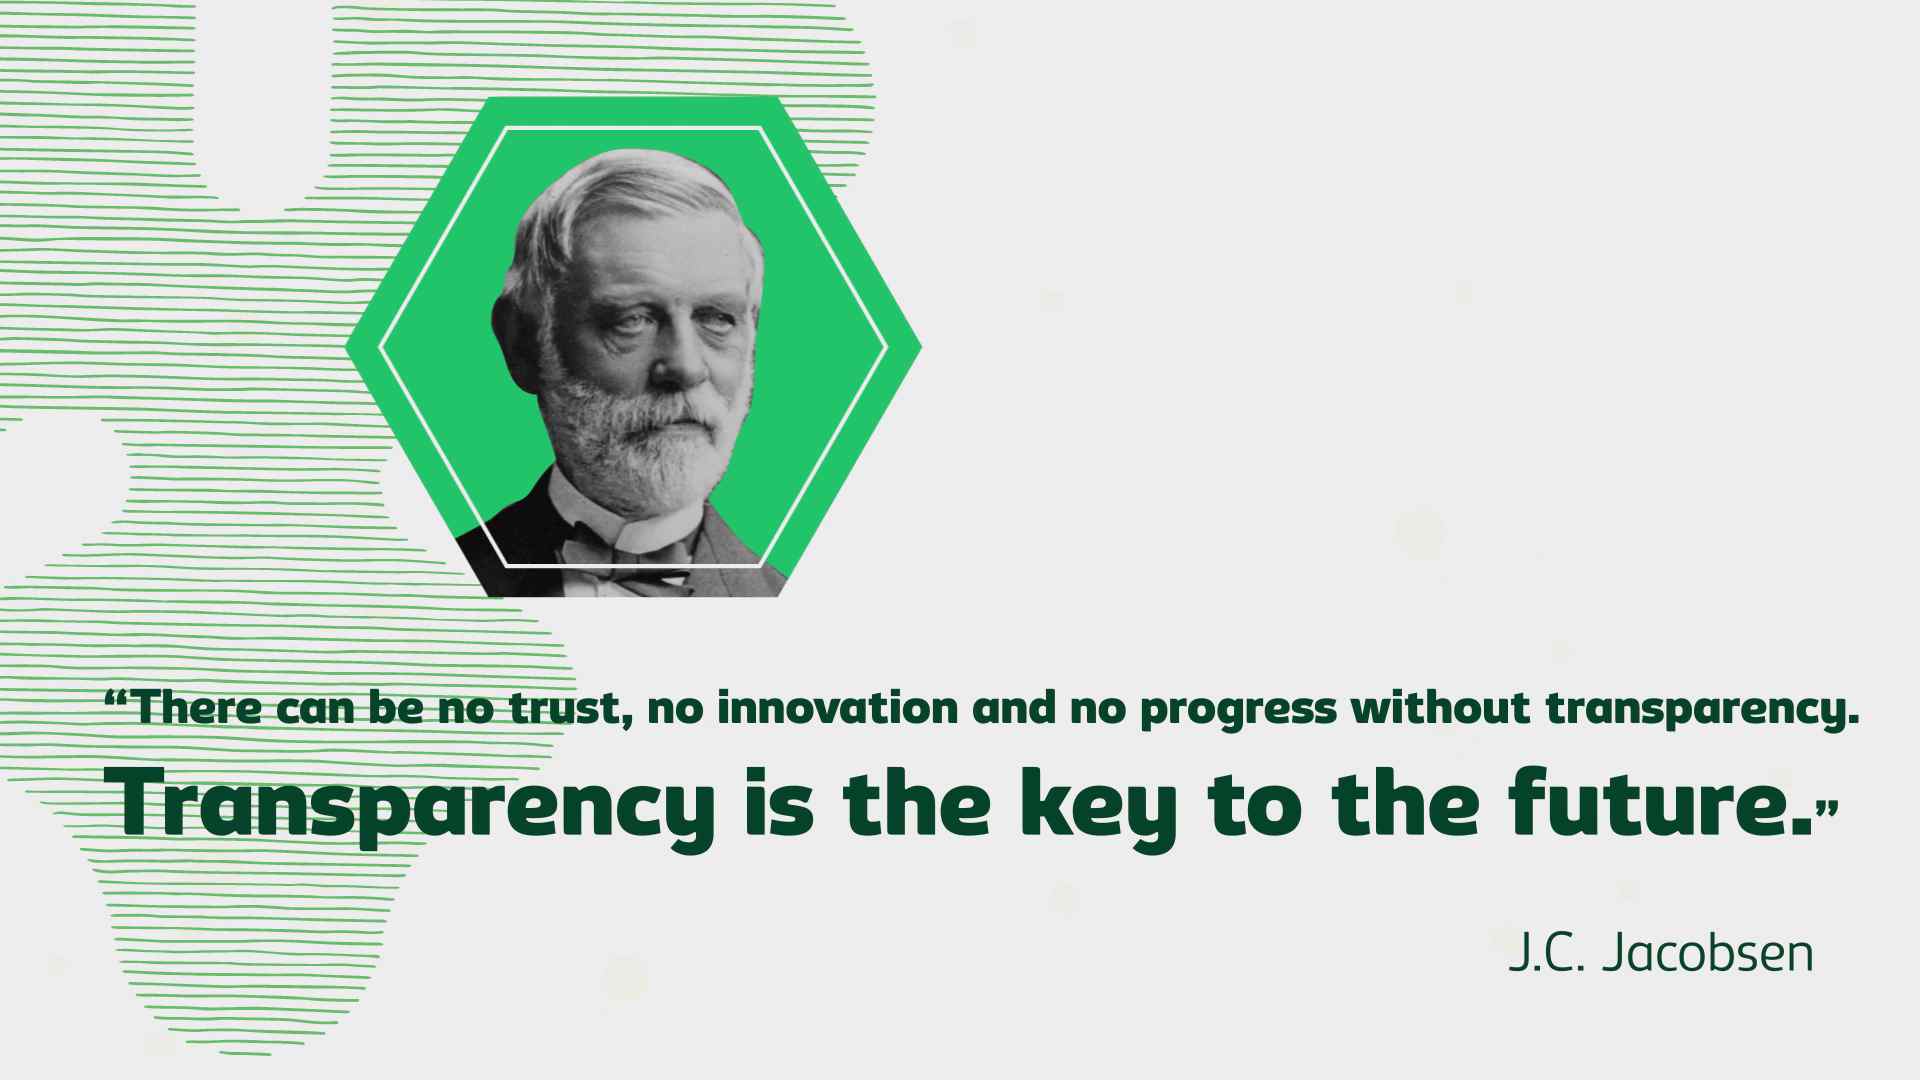 Transparency is the key to the future - J.C. Jacobsen